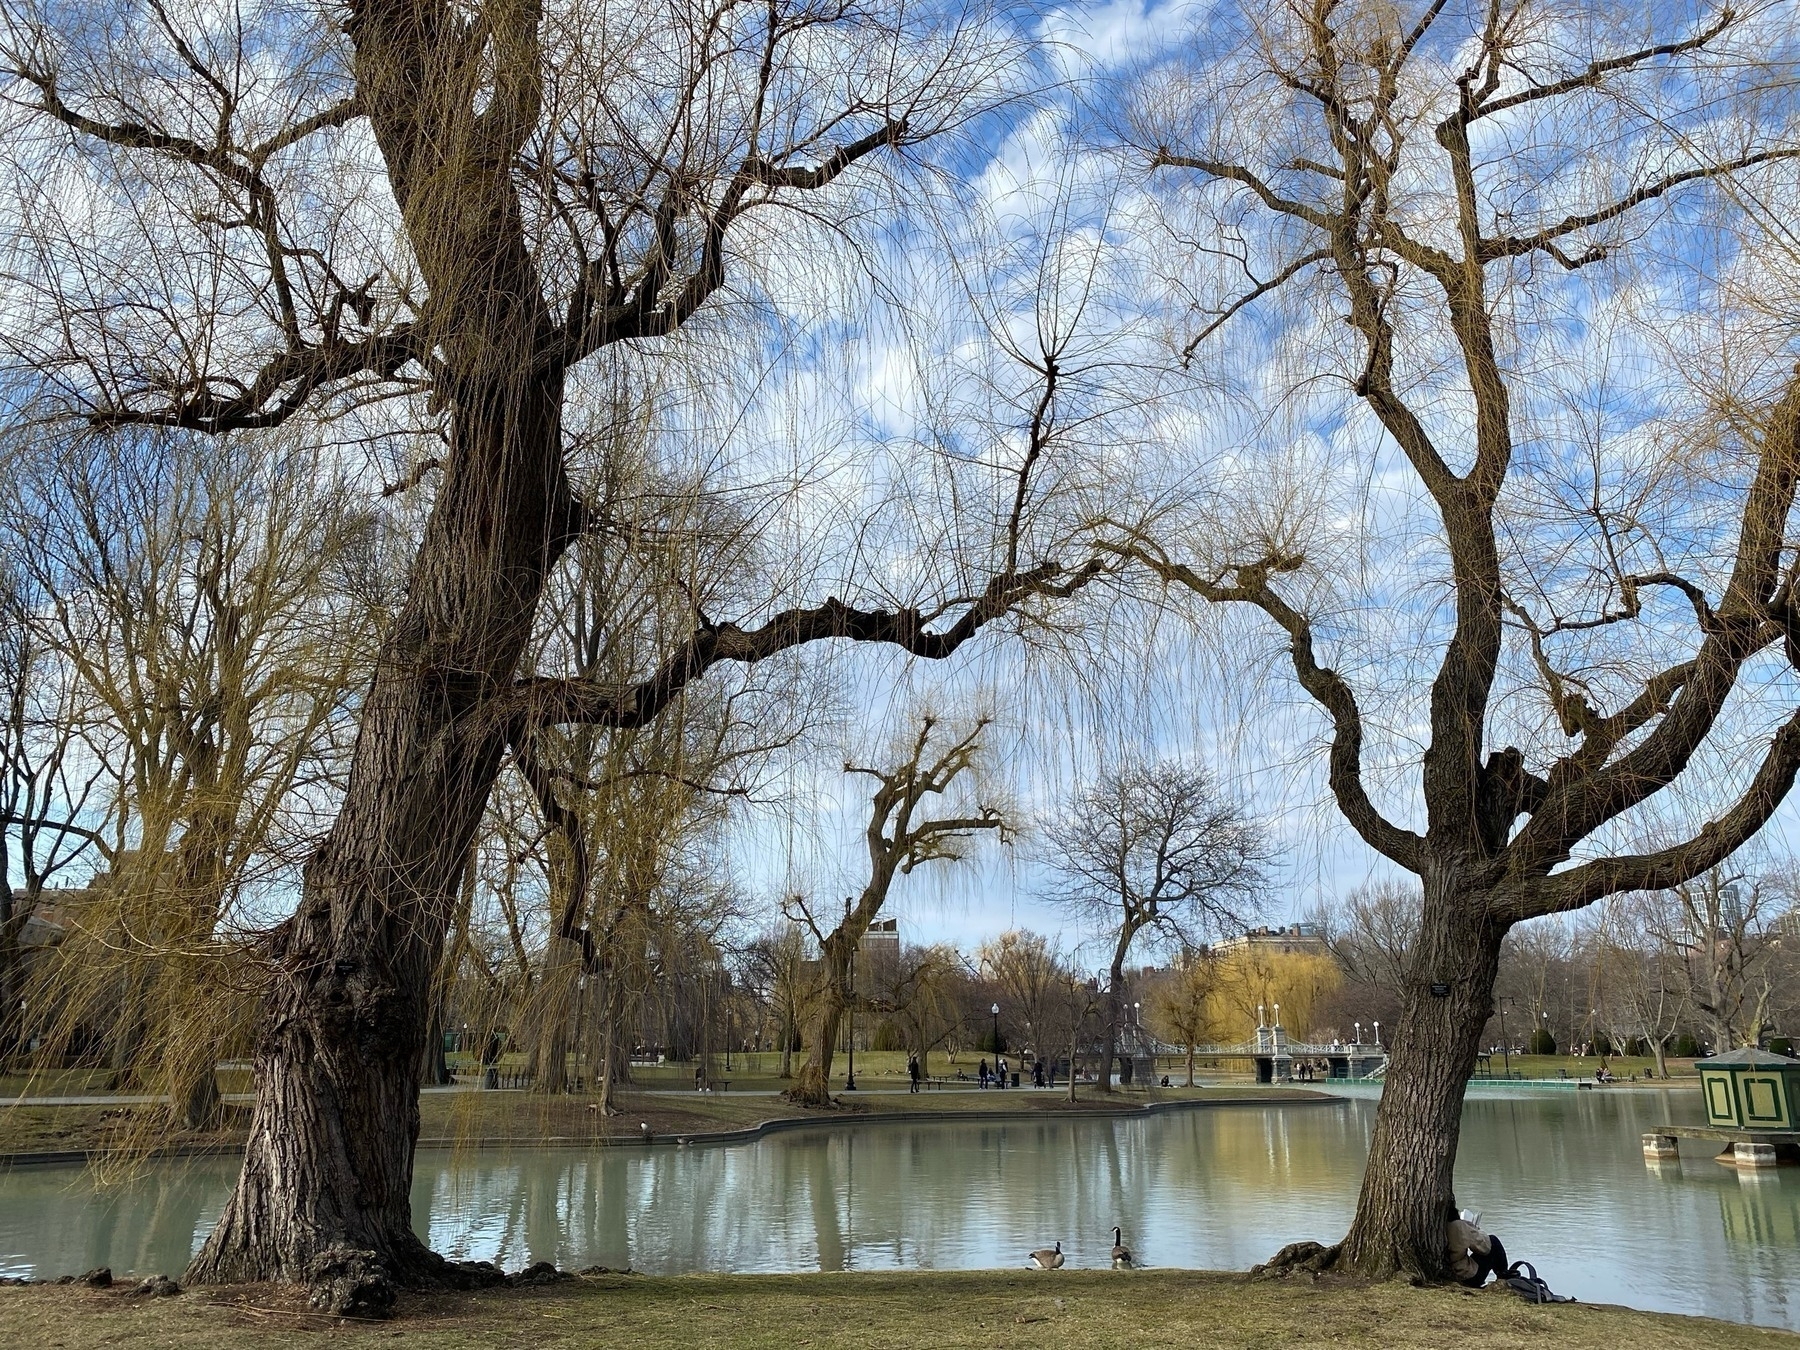 View of a city park with a small pond surrounded by yellow tipped willow trees.